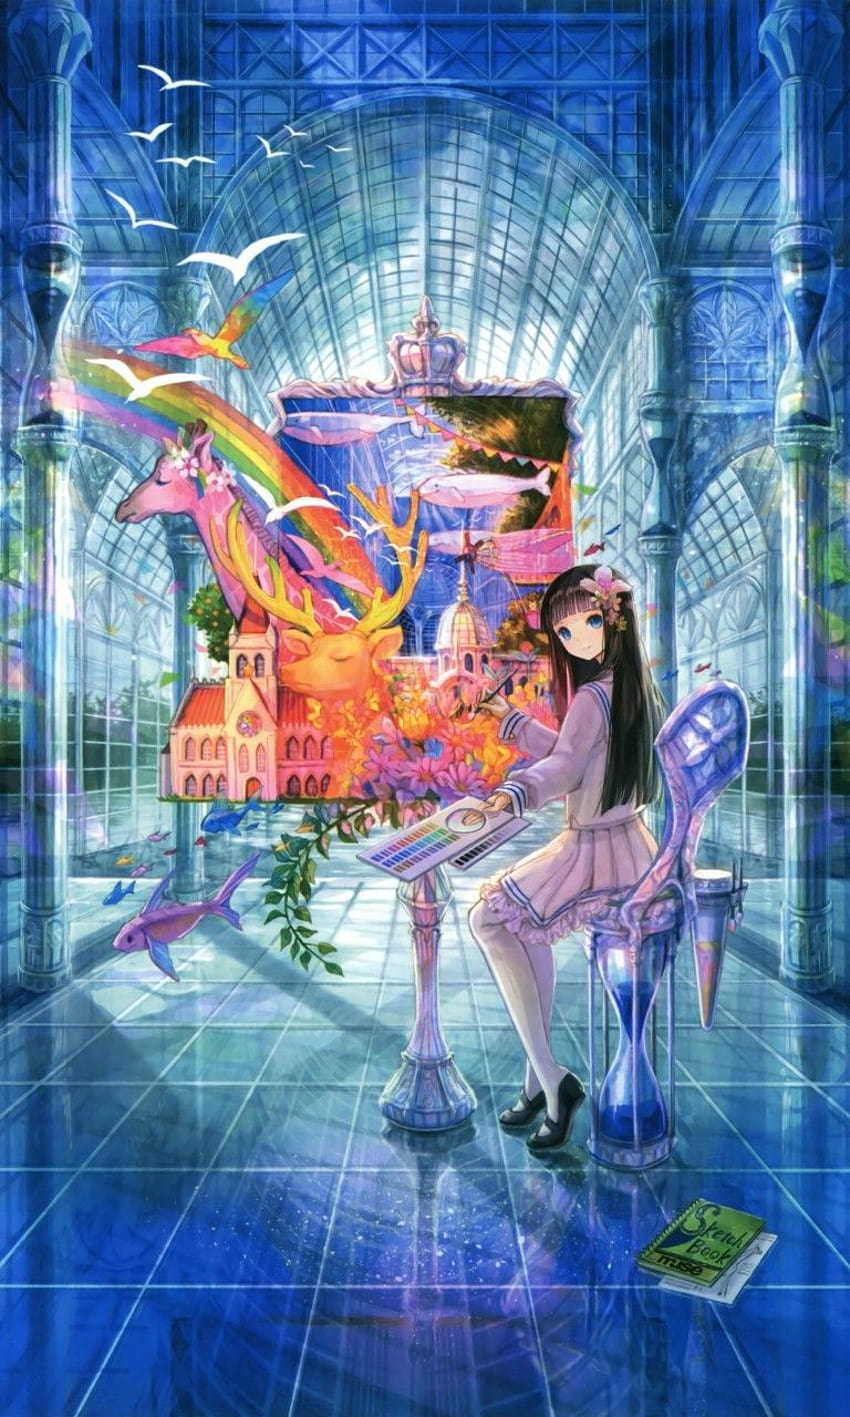 768x1280 Anime Girl, Painting, Sitting, Building, Abstract, Rainbow, Castle, Deer, Birds for Galaxy SIV,Nokia Lumia 900,925,1020, Acer Picasso HD phone wallpaper